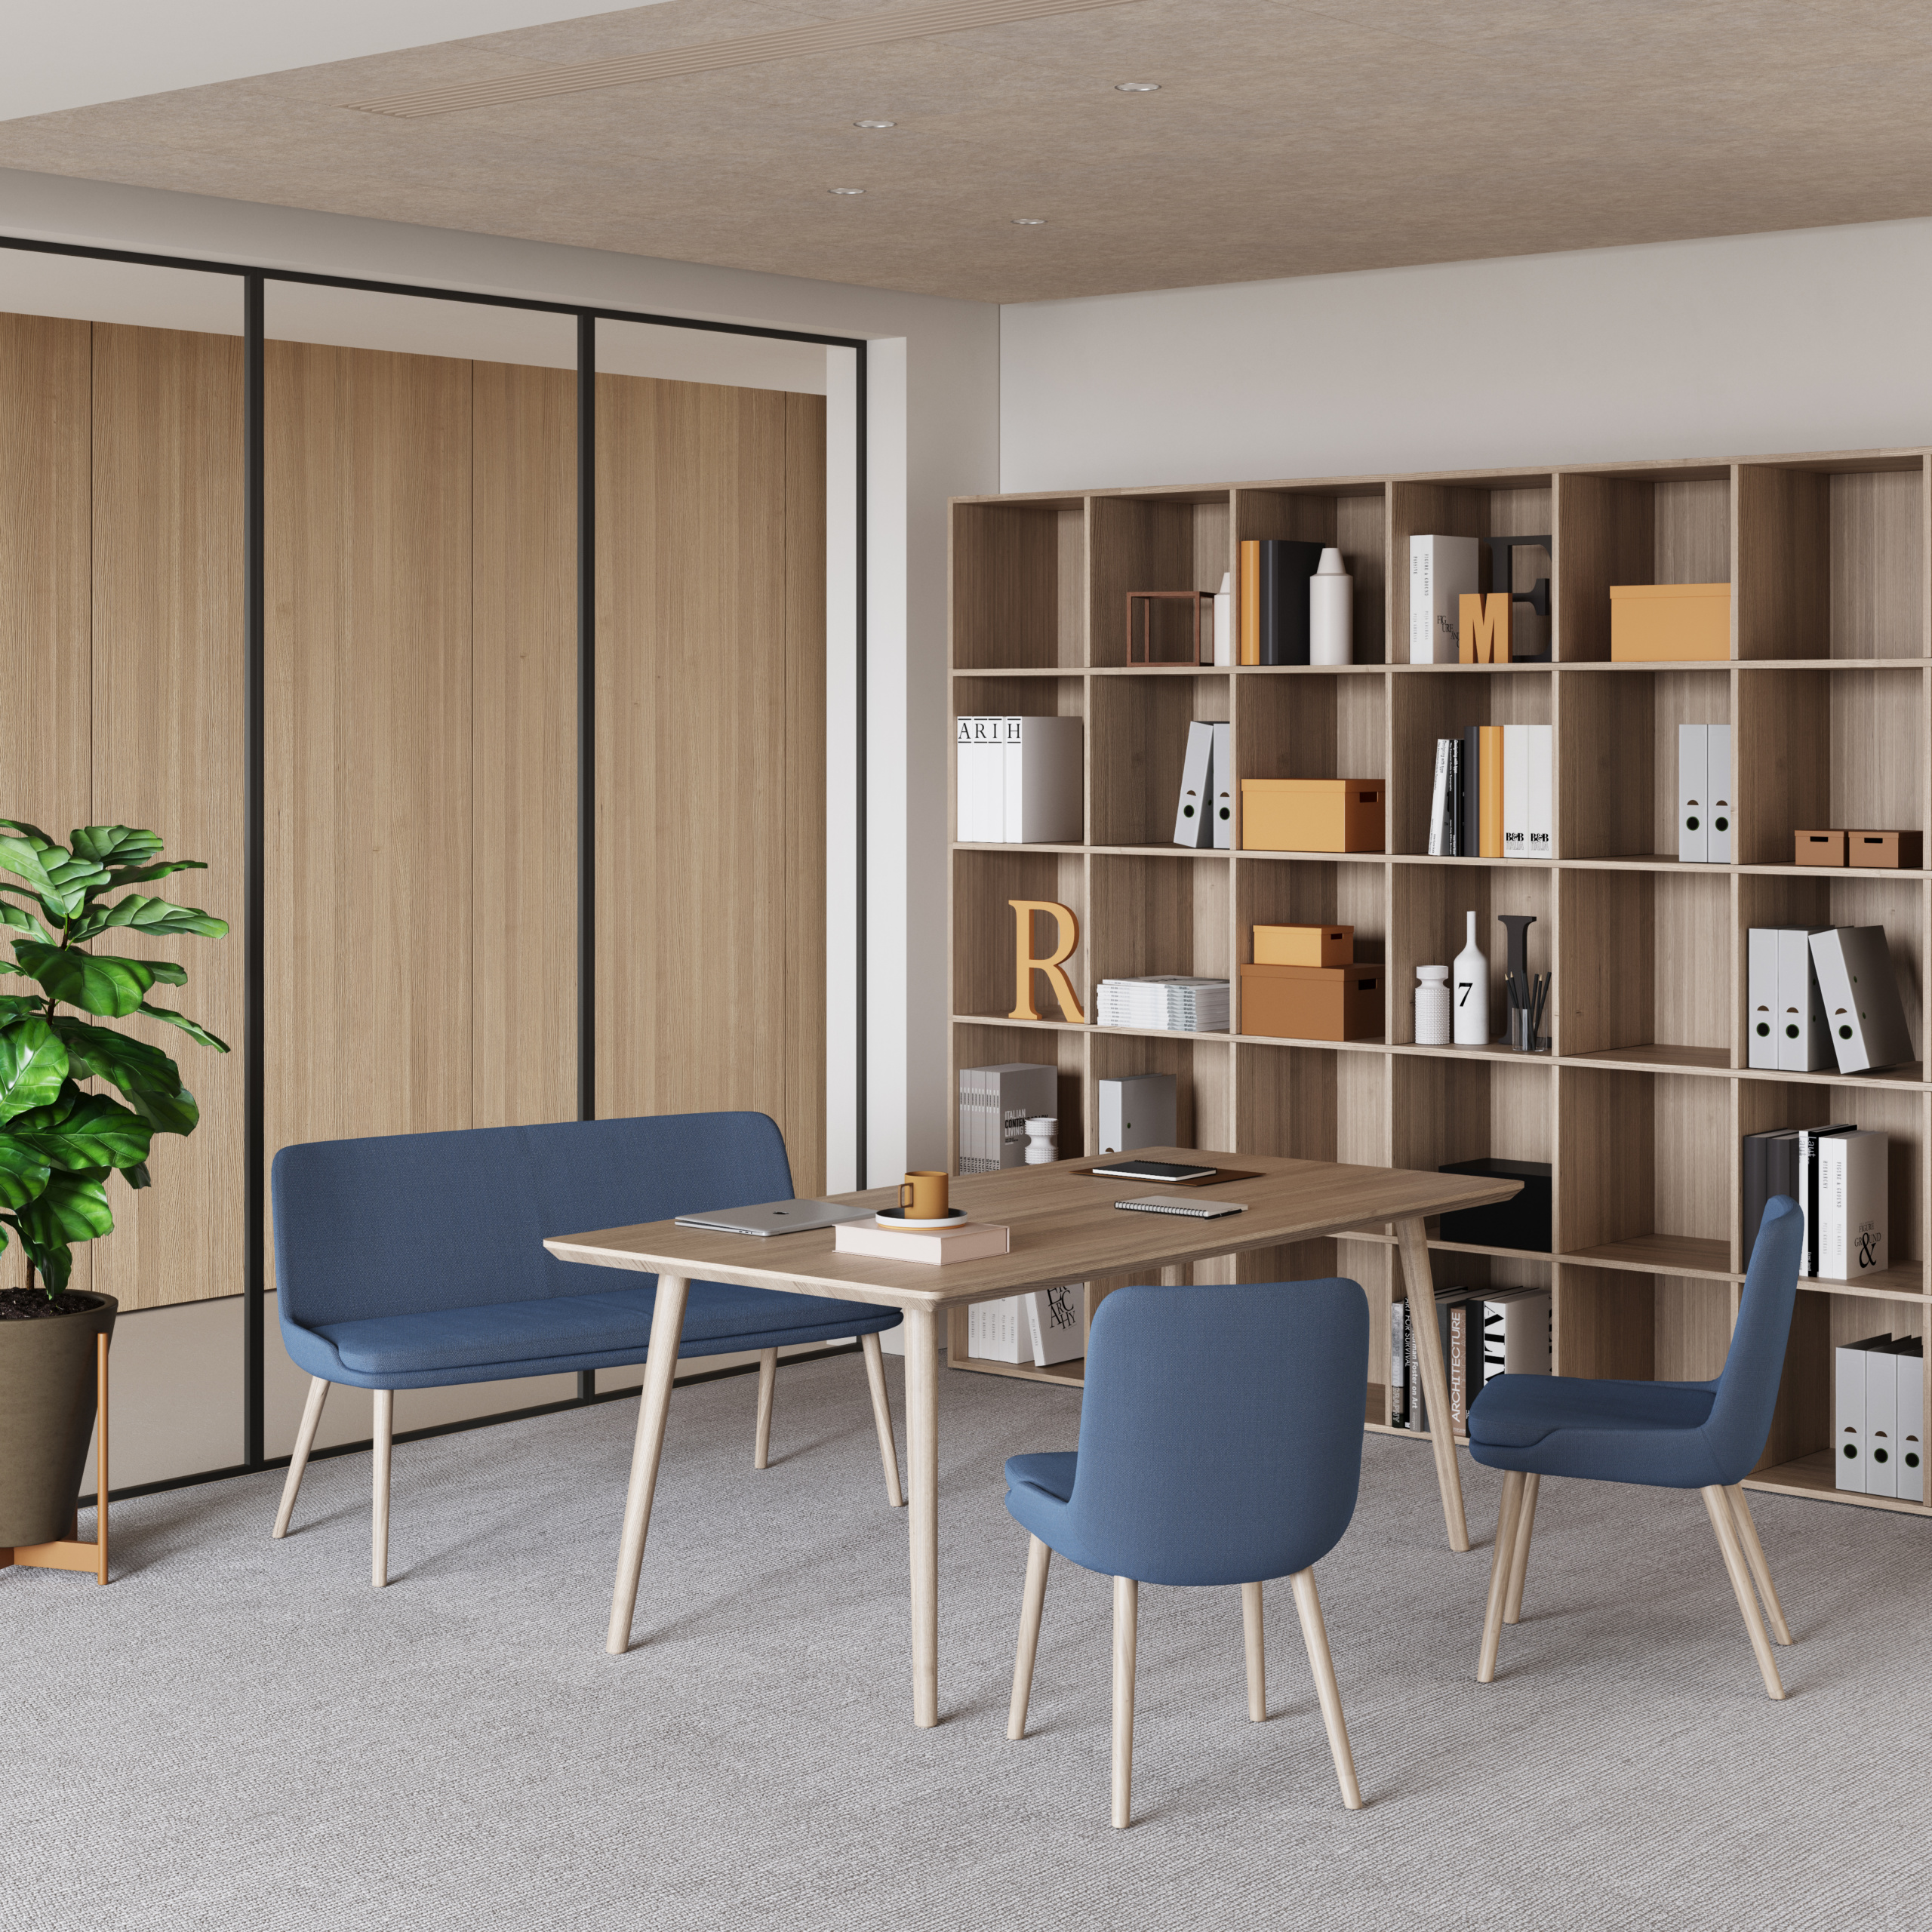 Keilhauer’s Wunder Collection Helps Inspire New Ideas in any Workplace